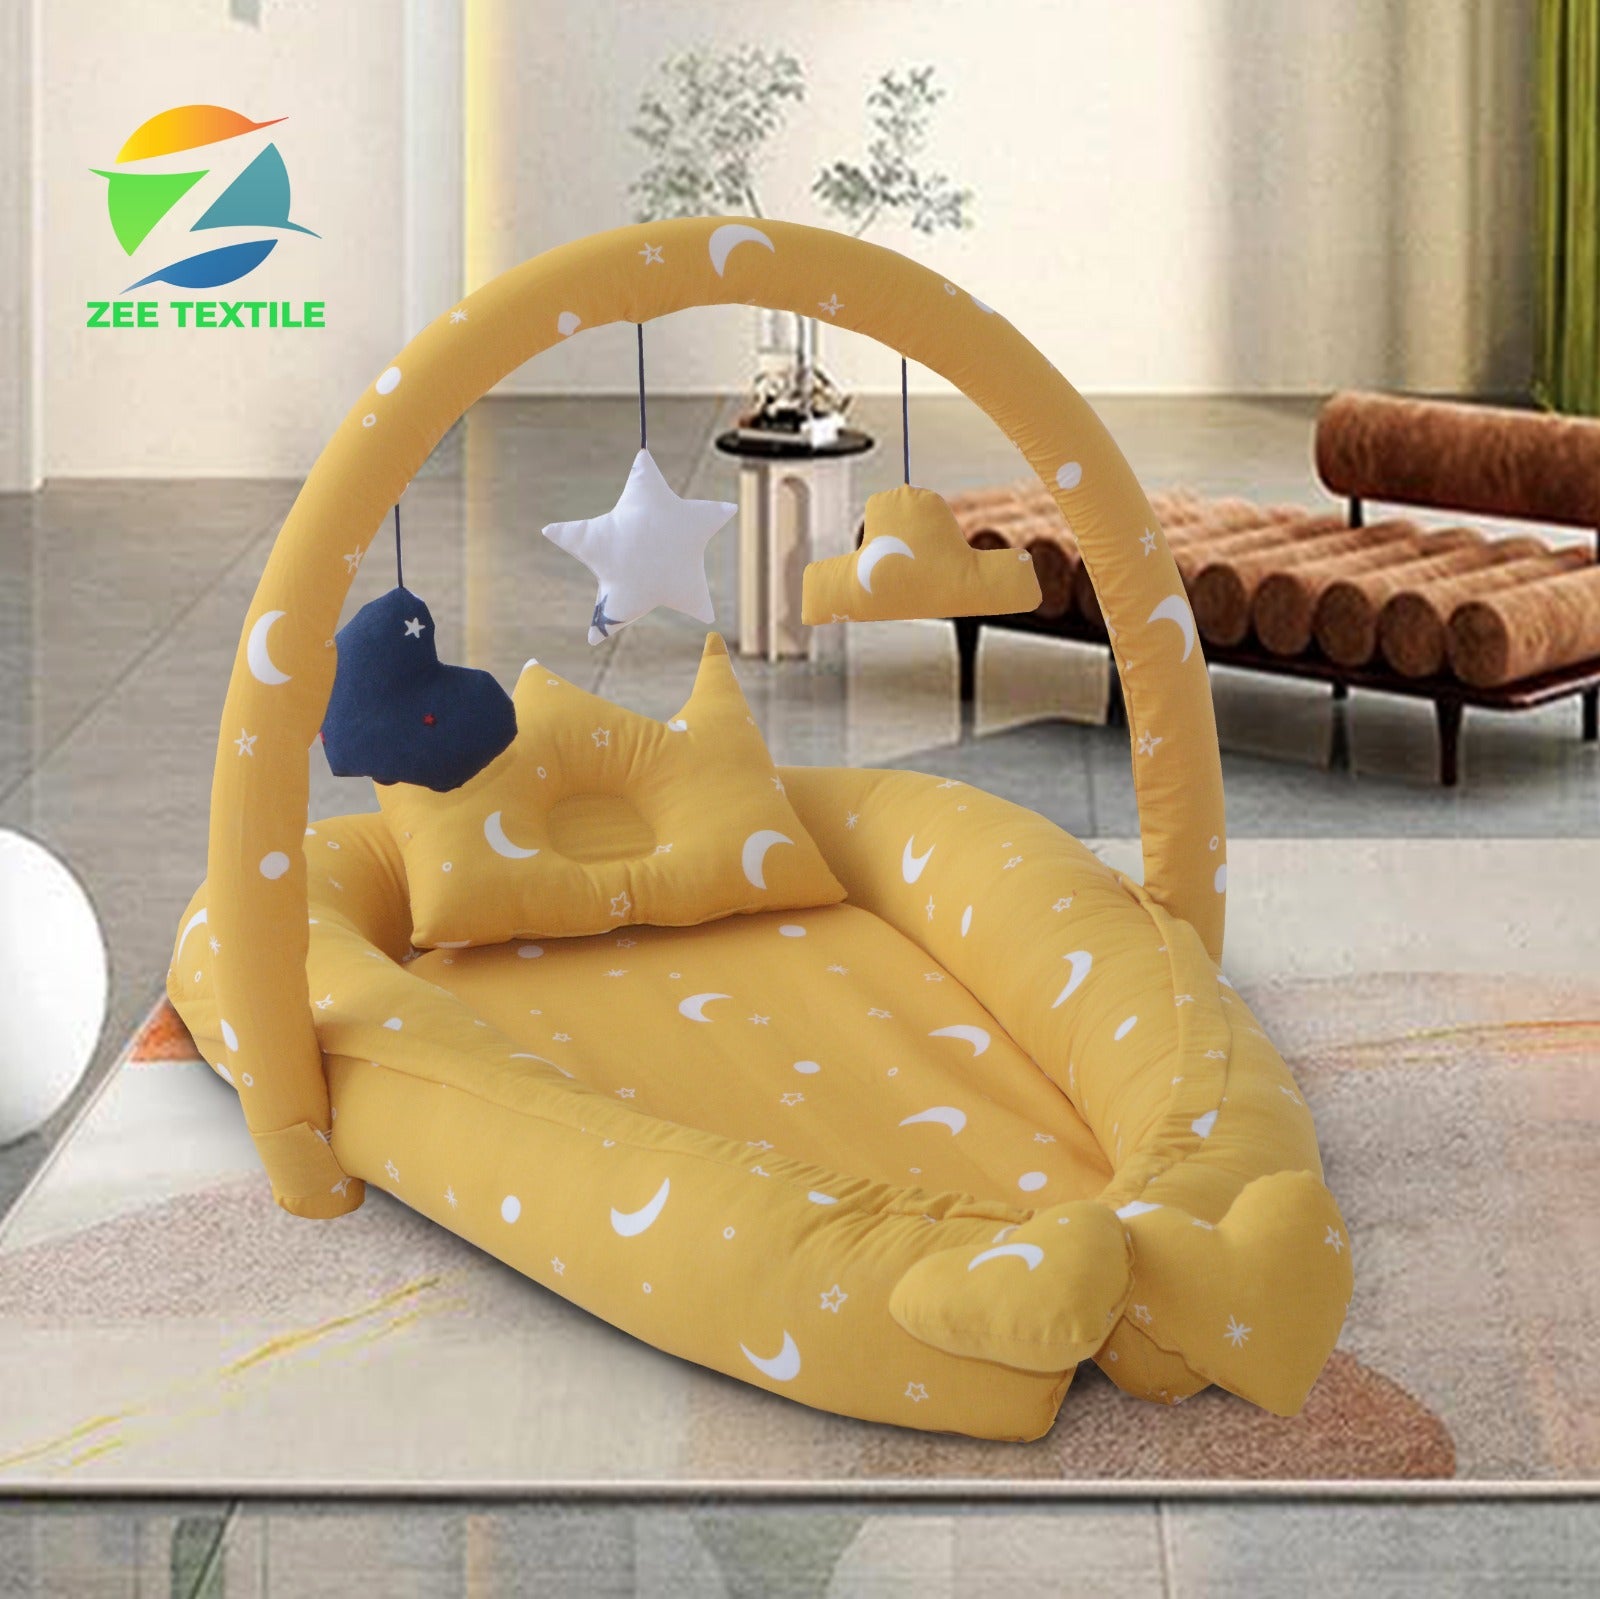 Printed Baby snuggle Bed with Crown Pillow and Mosquito Net- Yellow